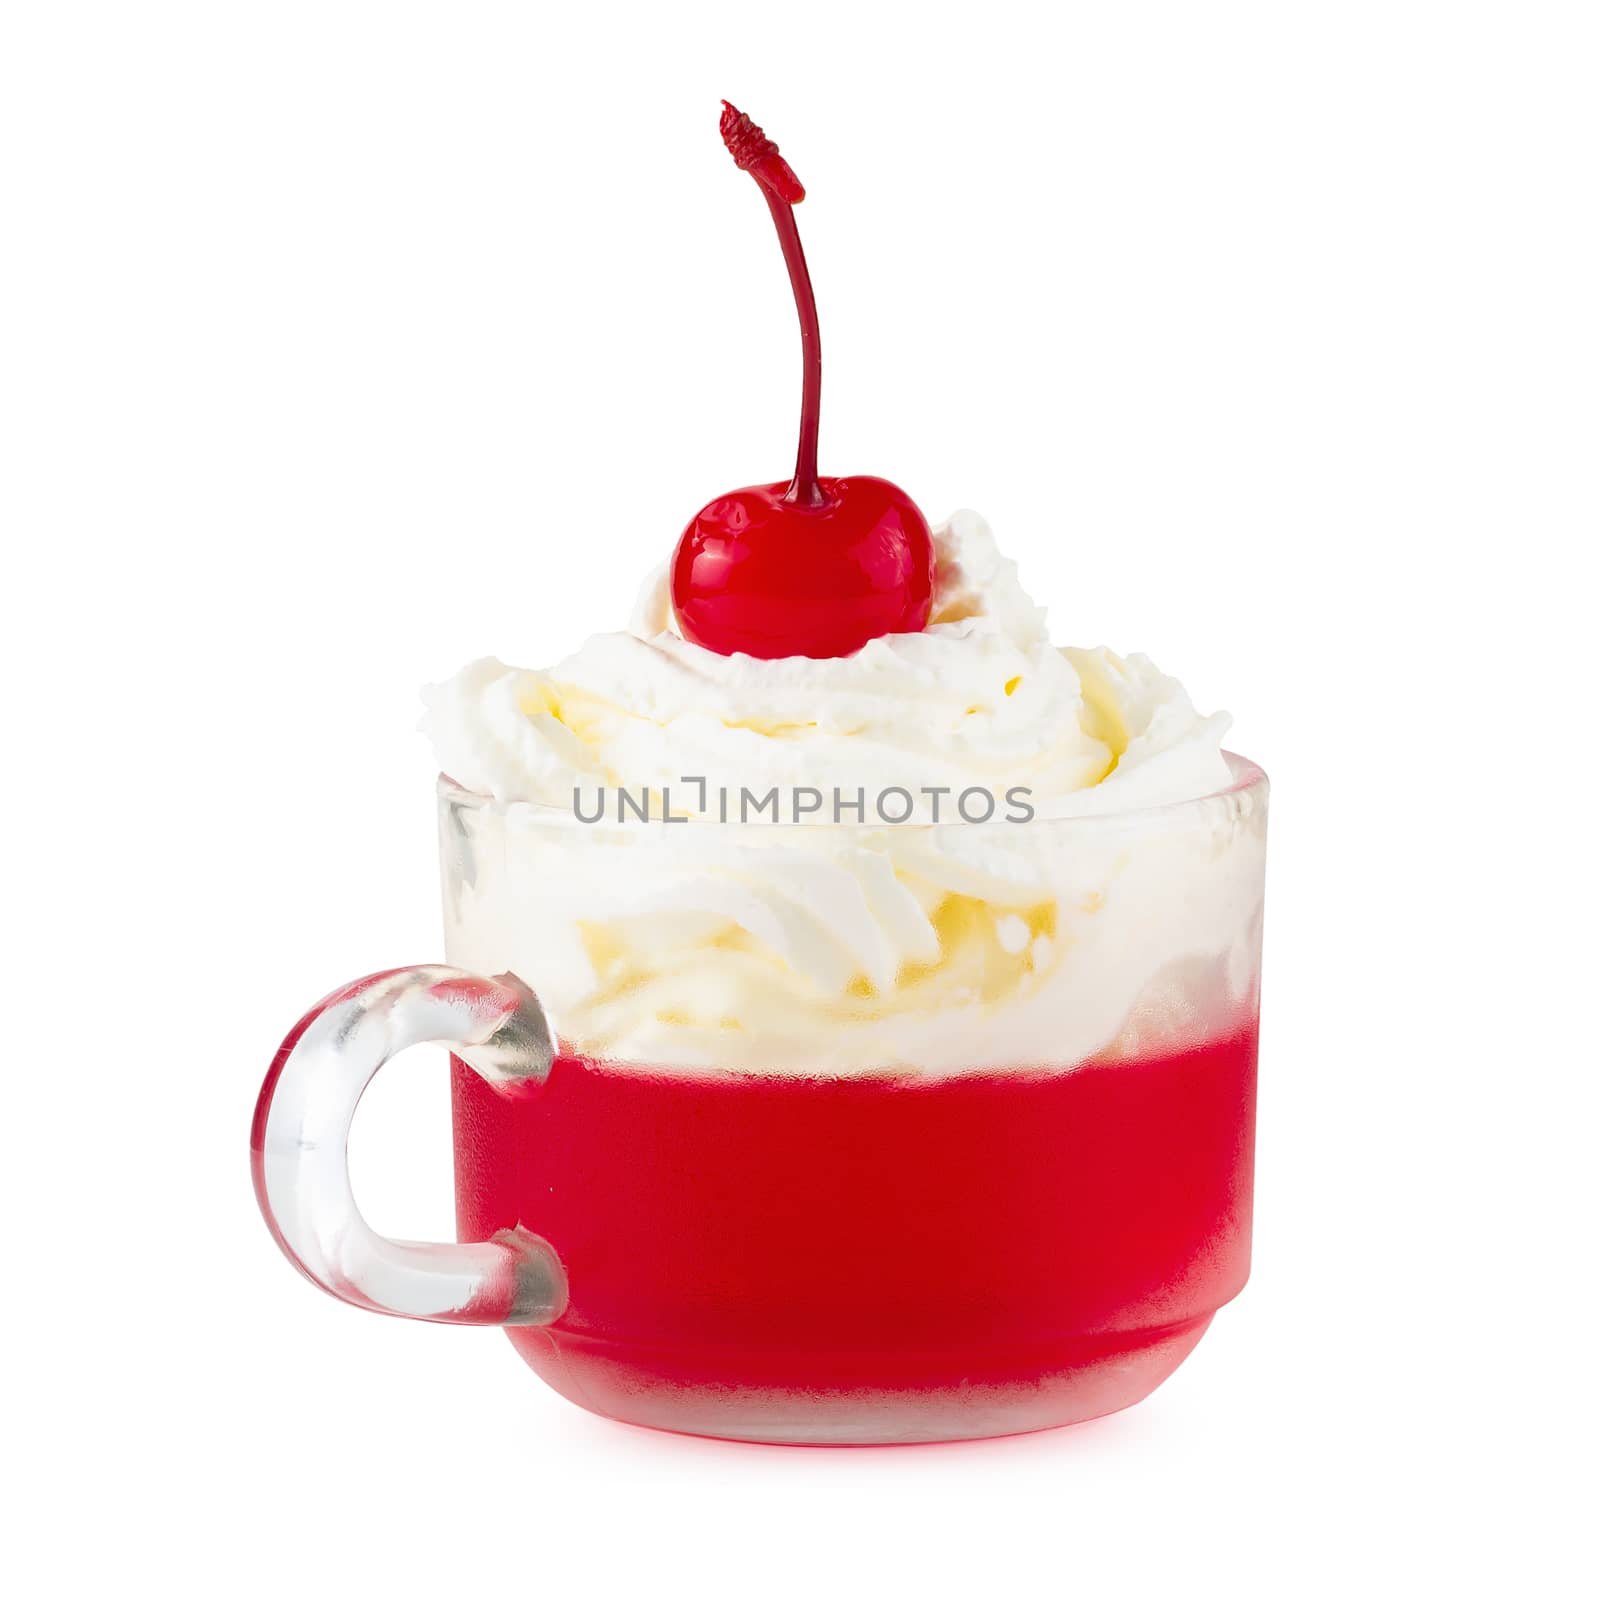 Strawberry jelly in a glass with cherries and whipped cream isol by kaiskynet